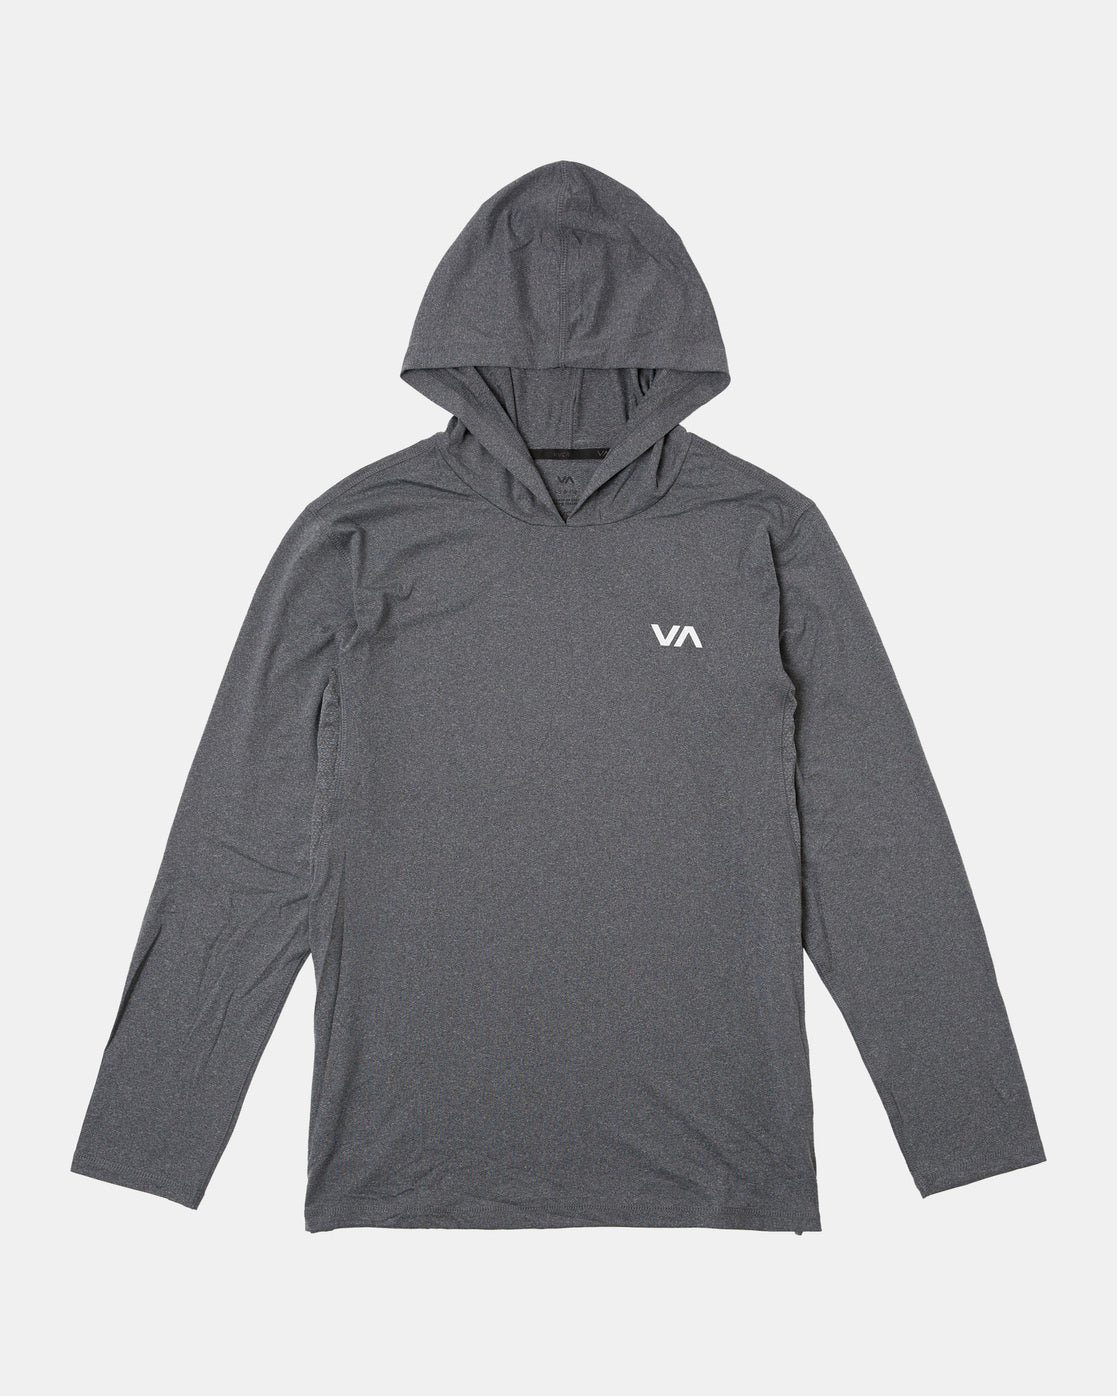 Sport Vent Technical Hooded Top - Black – RVCA